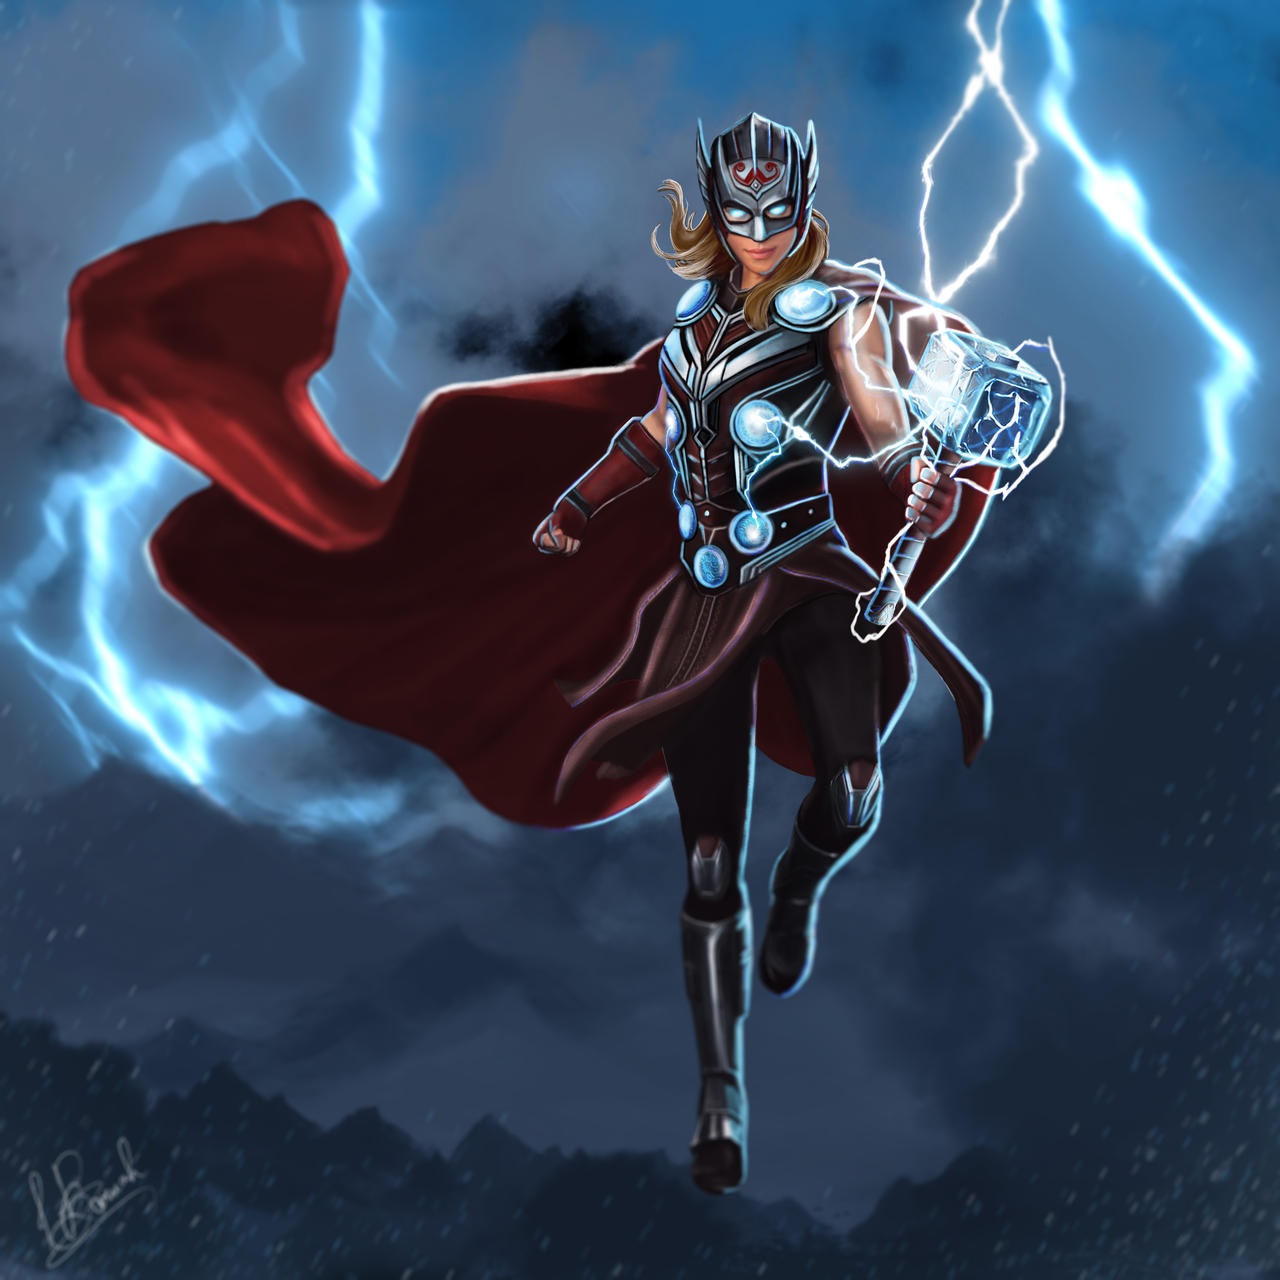 5 Ways I would fix Thor Love and Thunder by Justiceavenger on DeviantArt